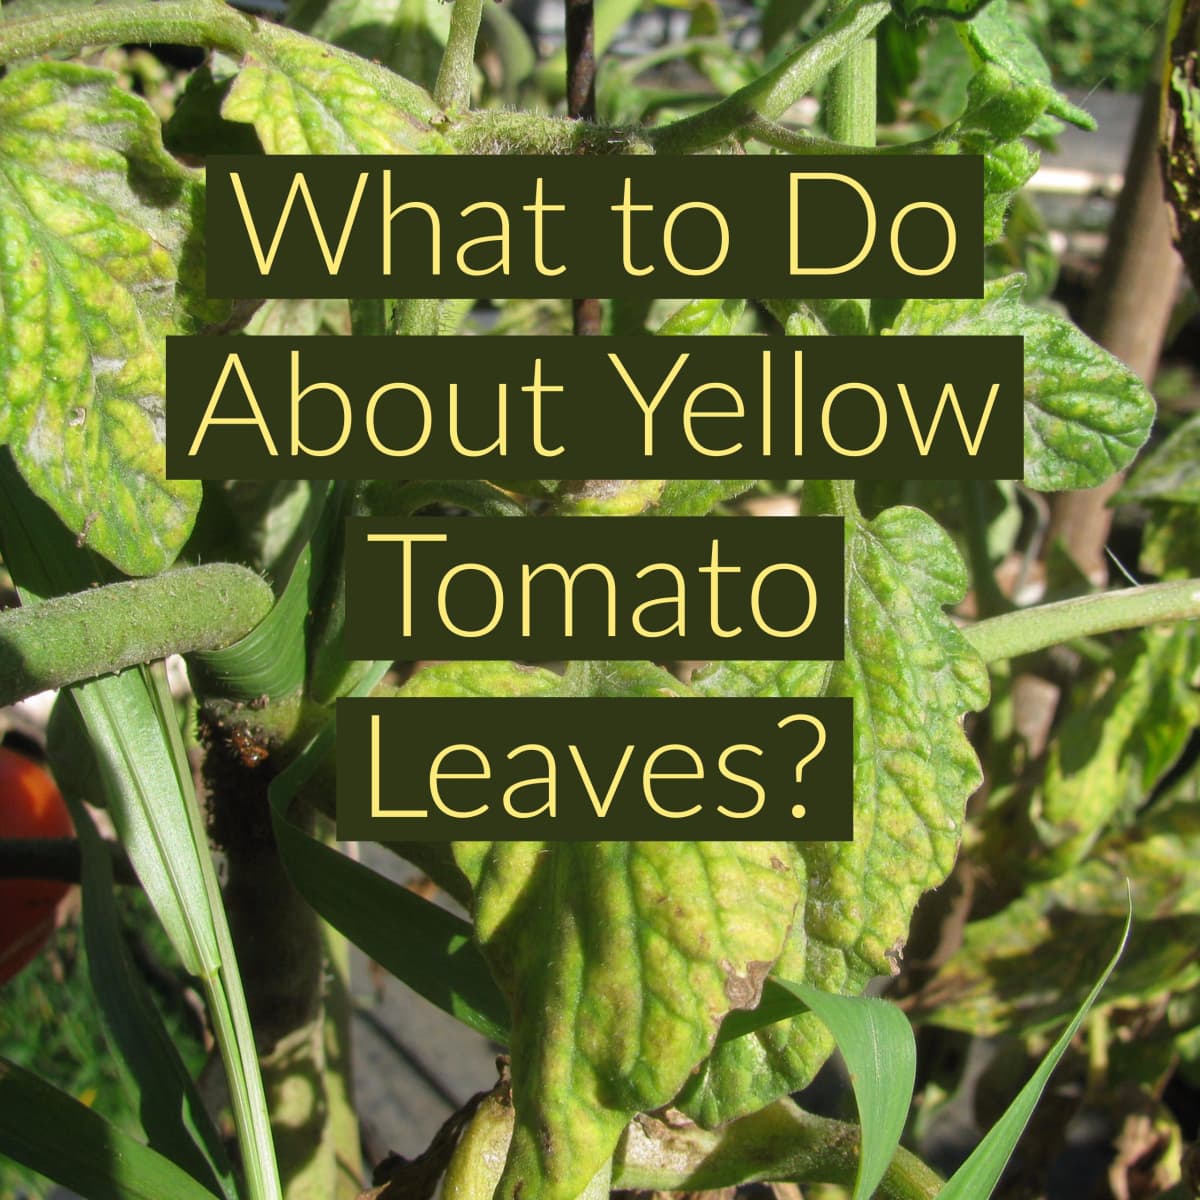 7 Causes & Cures Of Yellow Leaves On Tomato Plants - Dengarden